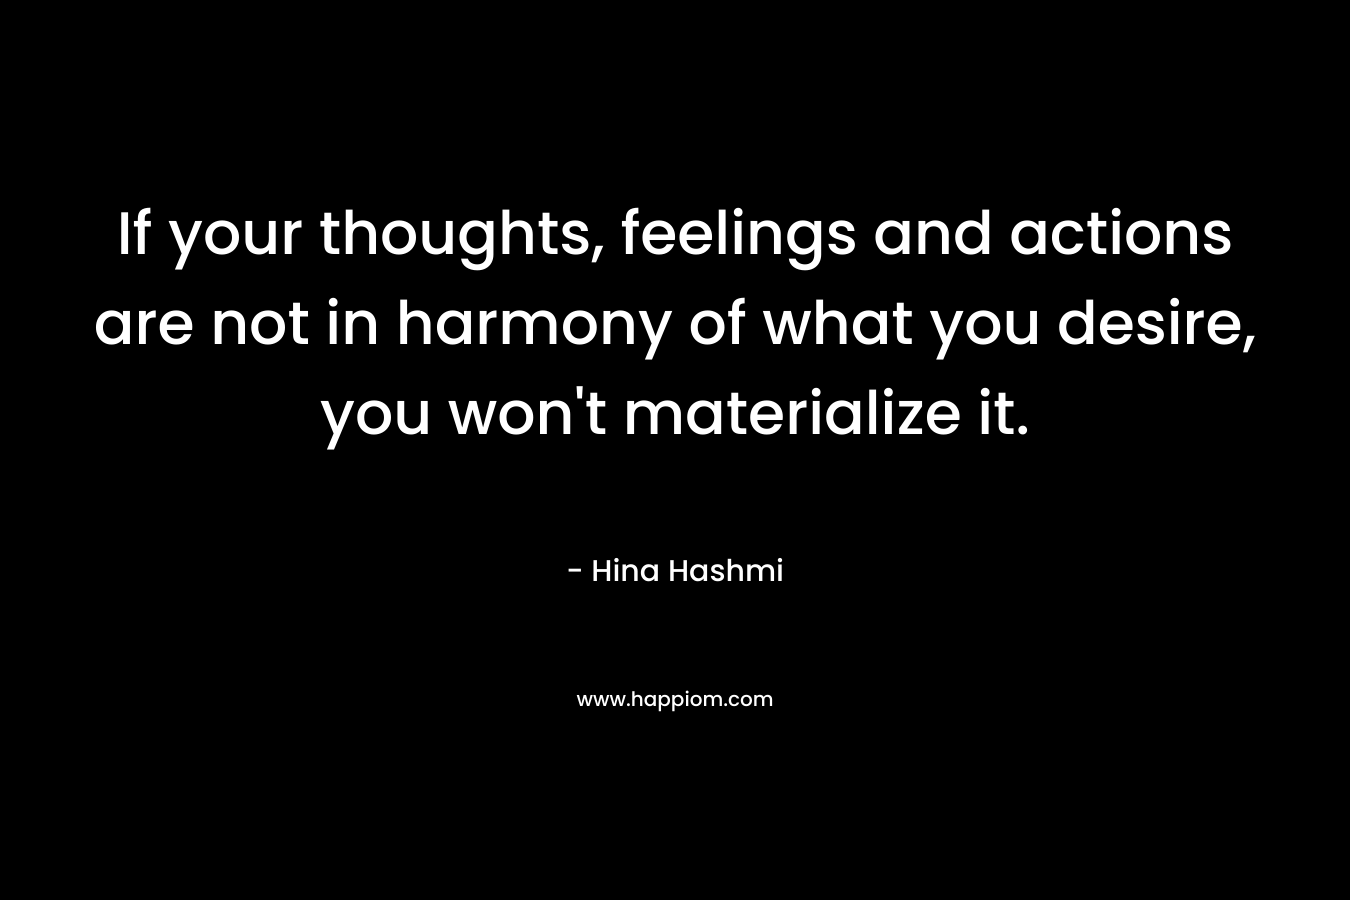 If your thoughts, feelings and actions are not in harmony of what you desire, you won’t materialize it. – Hina Hashmi